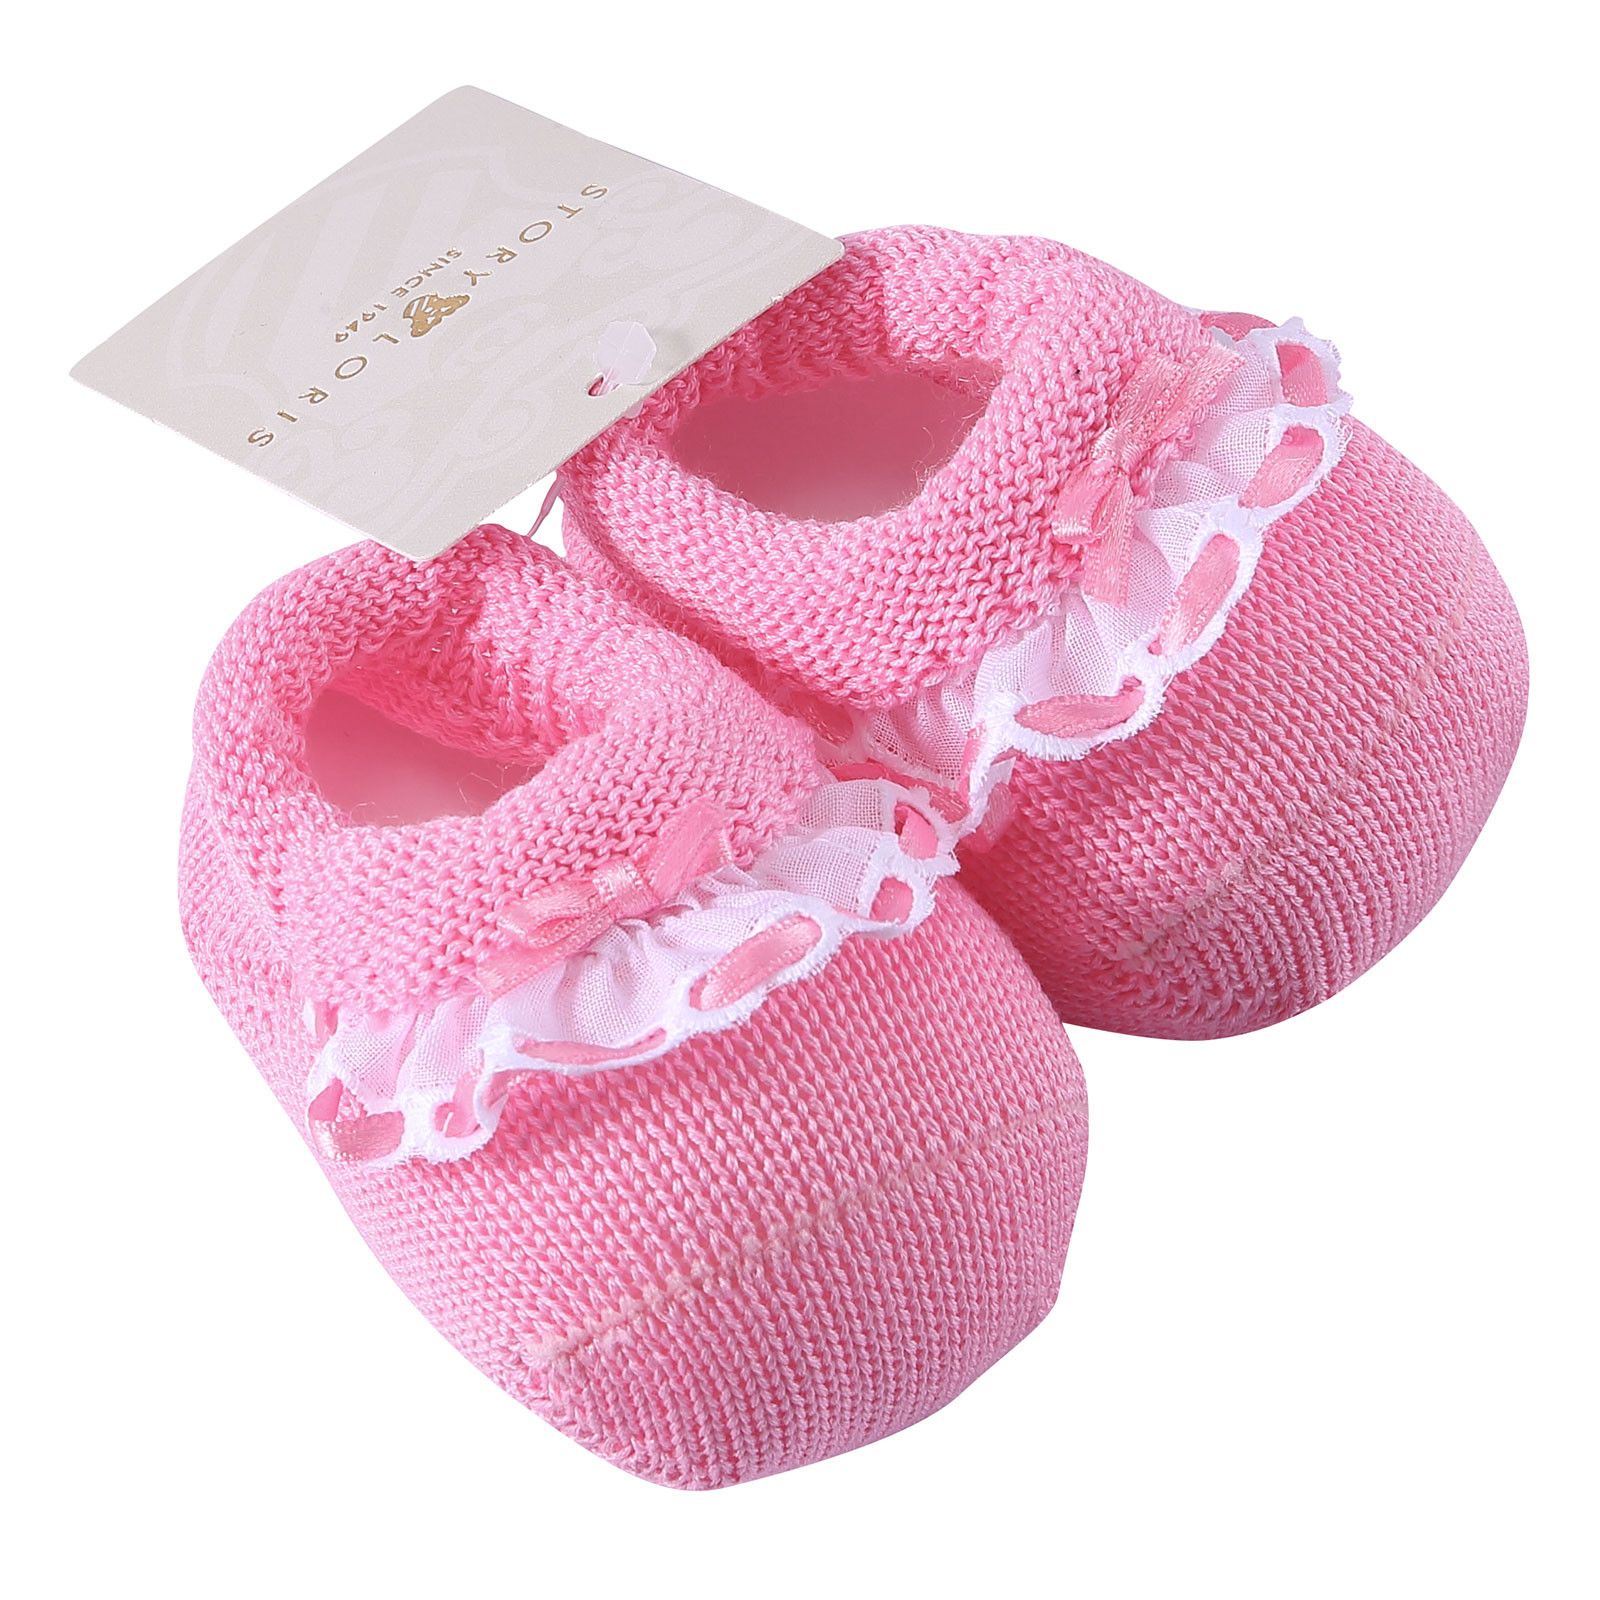 Baby Pink Lace Trims Knitted Cotton Shoes - CÉMAROSE | Children's Fashion Store - 2